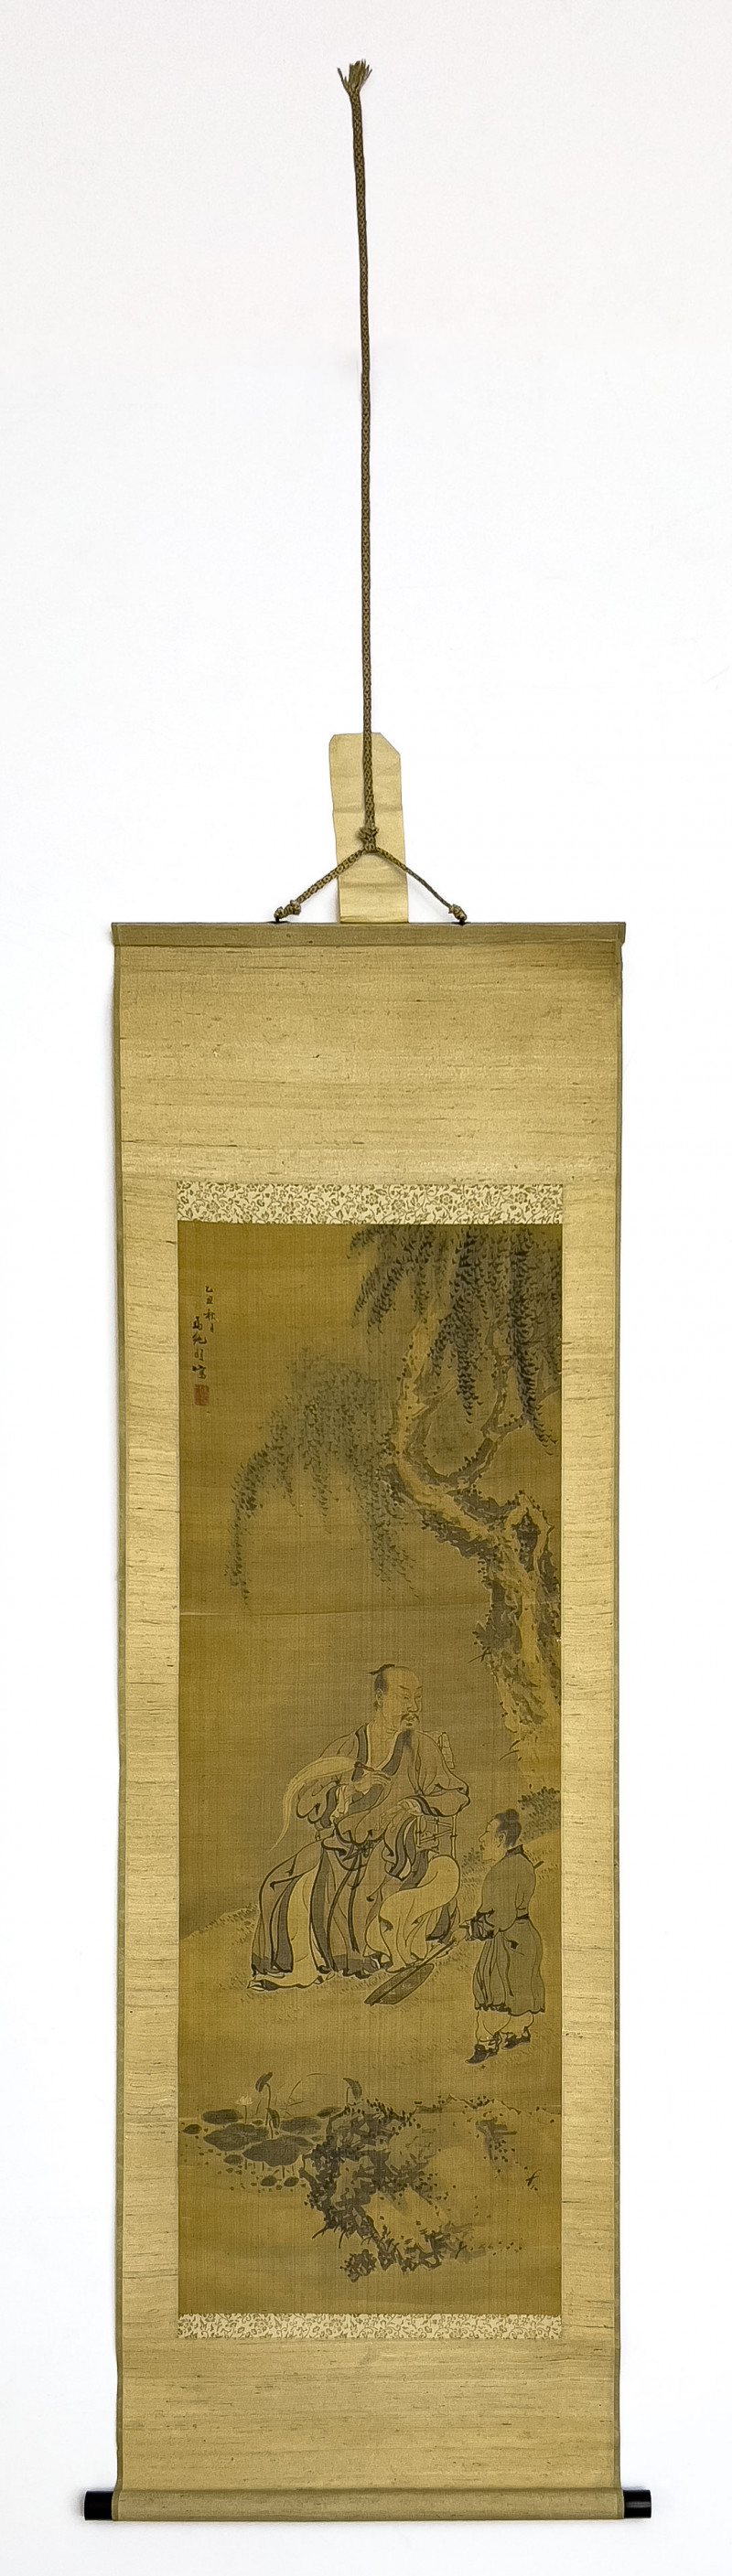 Chinese - Hanging Scroll, Figures Beneath a Tree